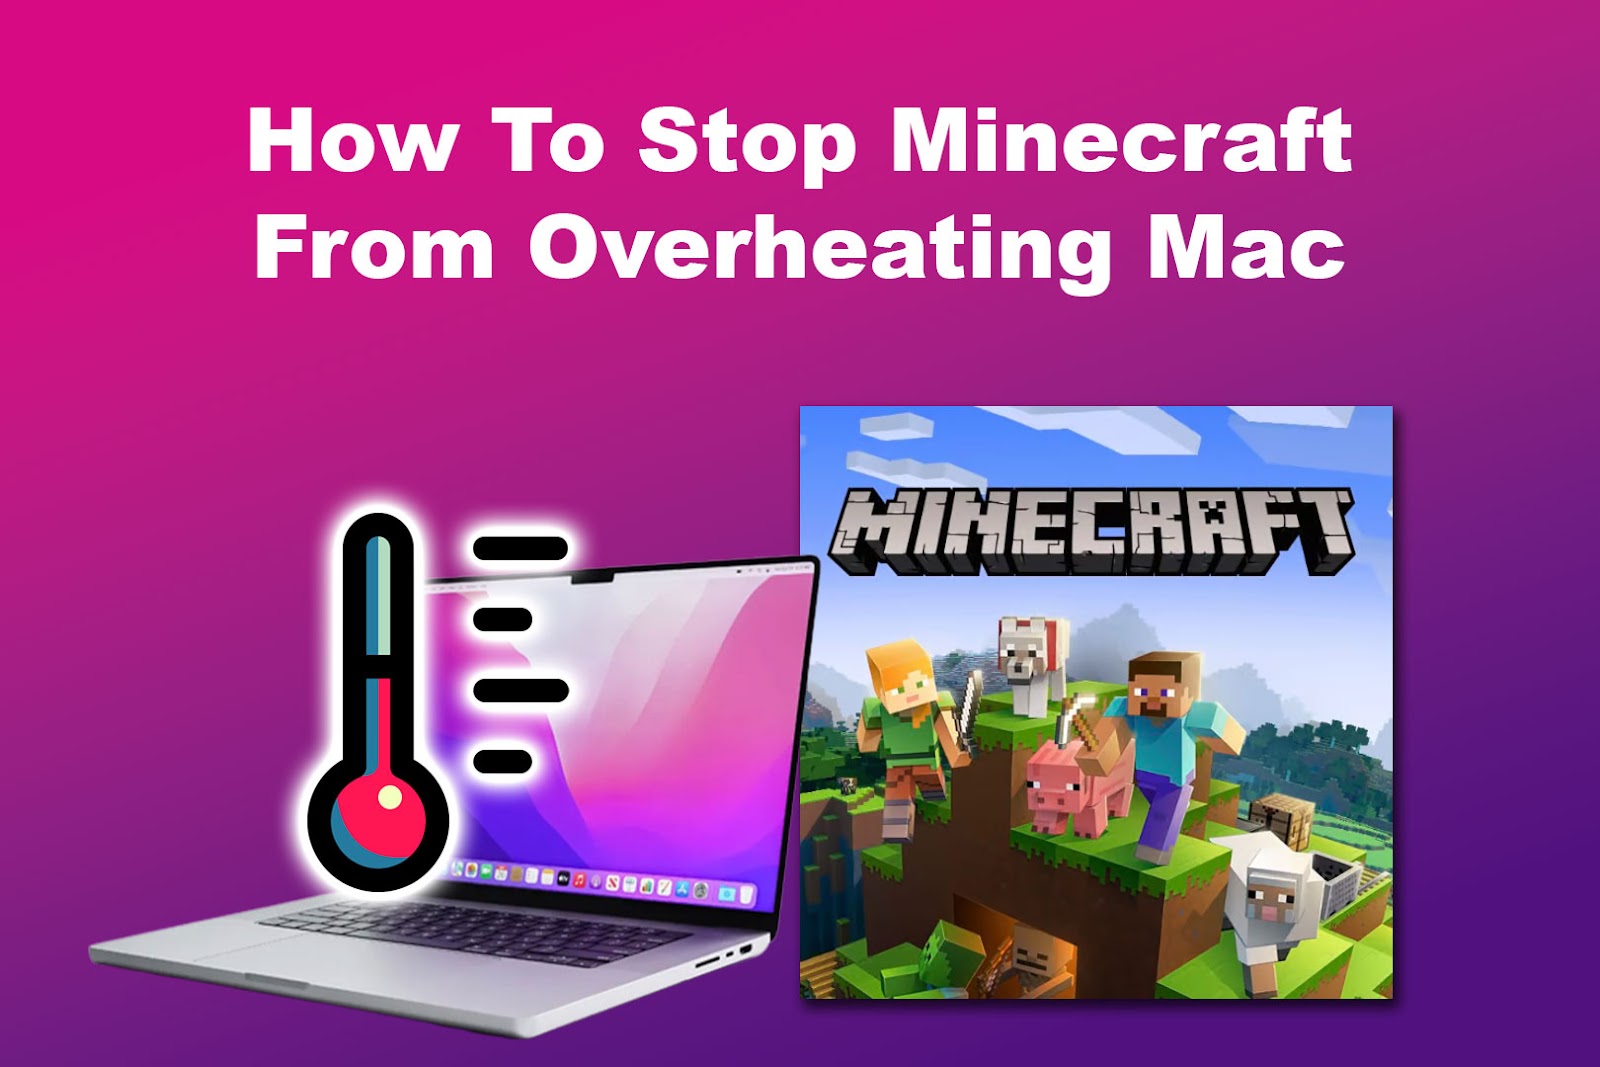 How To Stop Minecraft From Overheating Mac